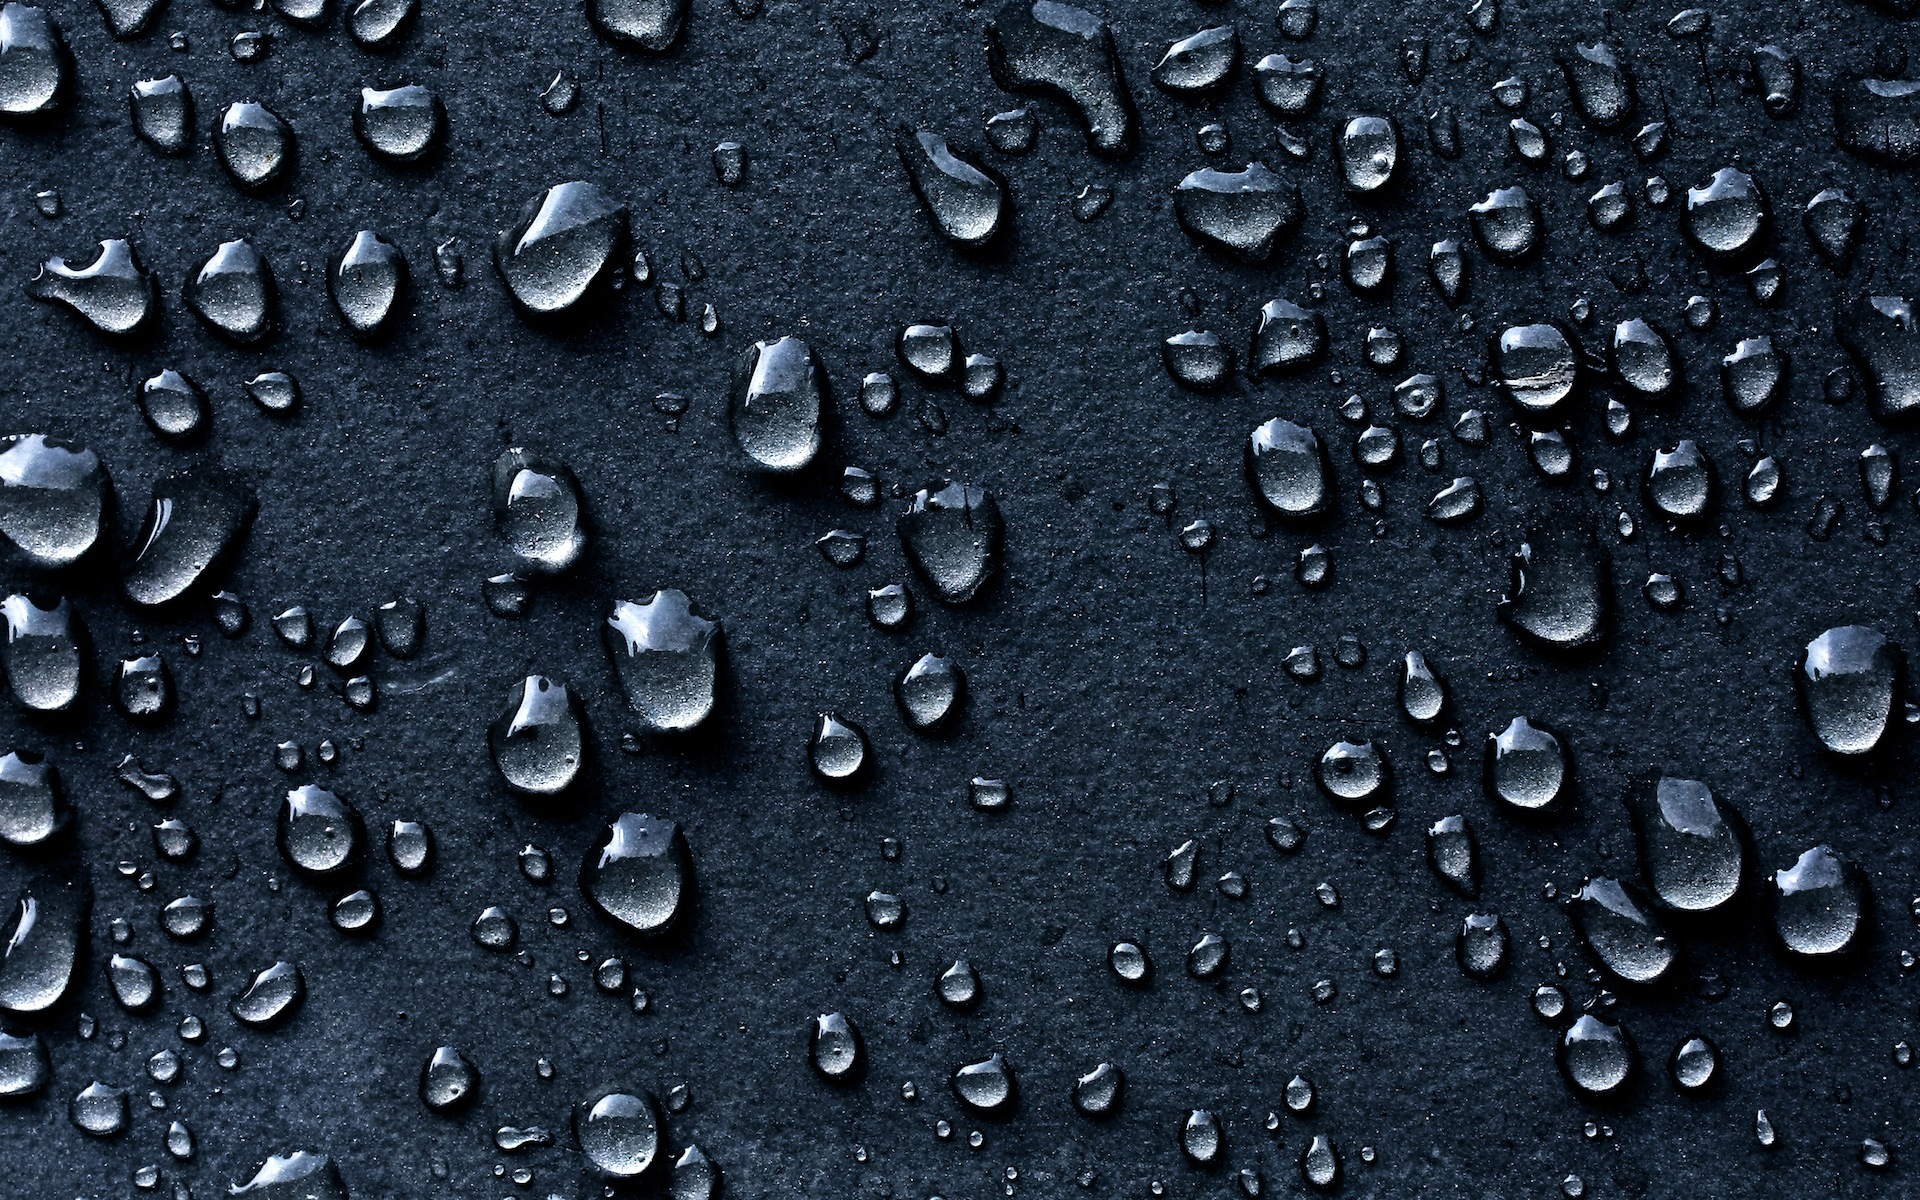  hd wallpaper you are viewing the abstract wallpaper named water drops